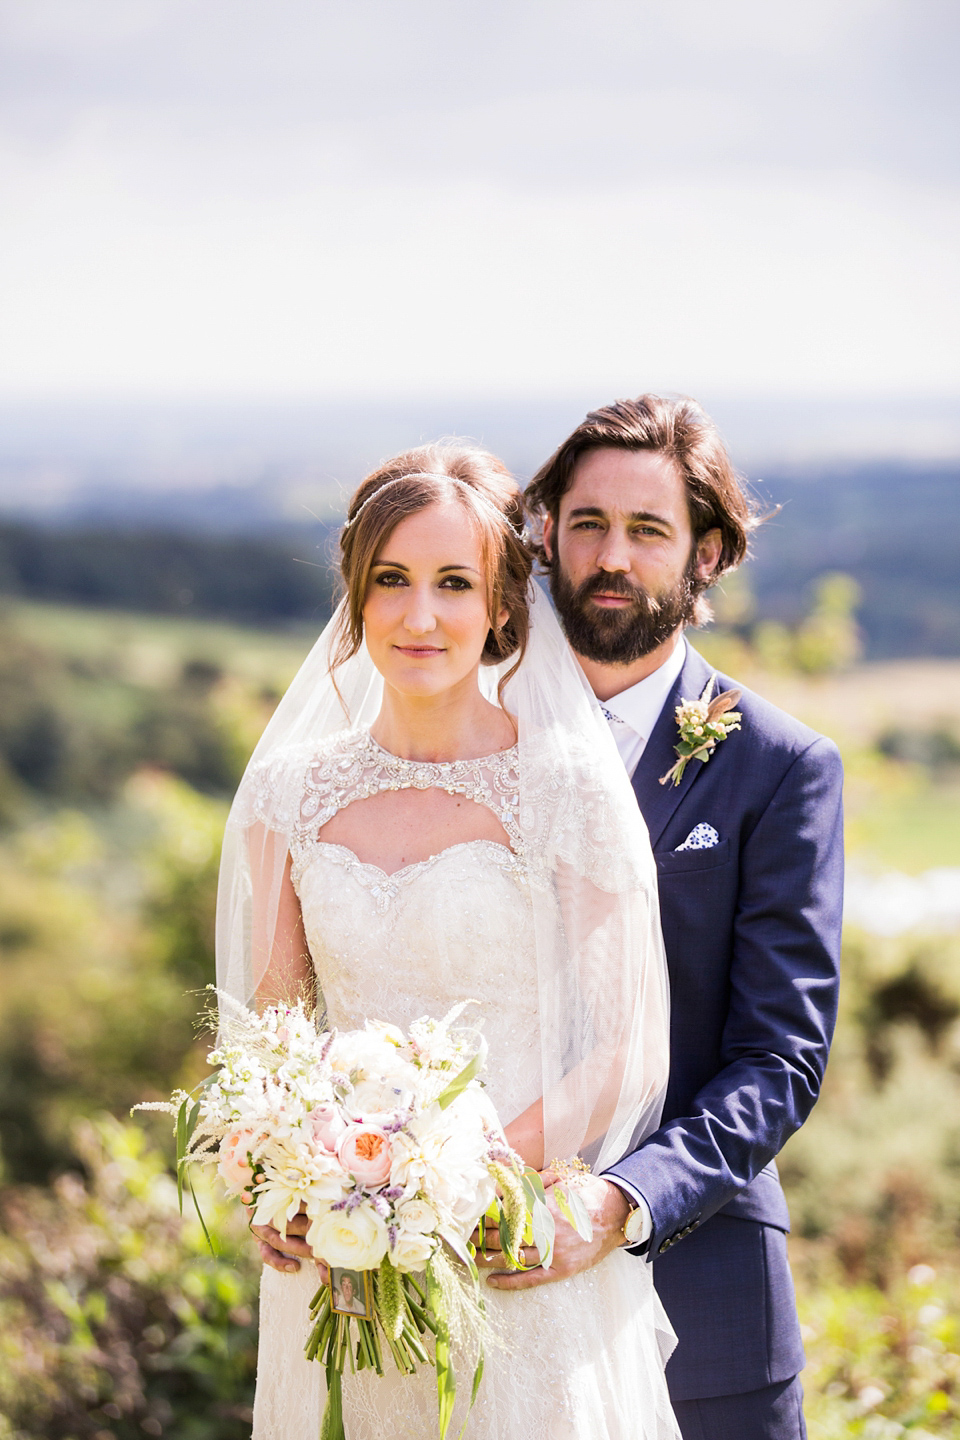 Laura wears a Maggie Sottero gown for her outdoor wedding at Natural Retreats at Richmond in the Yorkshire Dales. Photography by Lee Scullion.